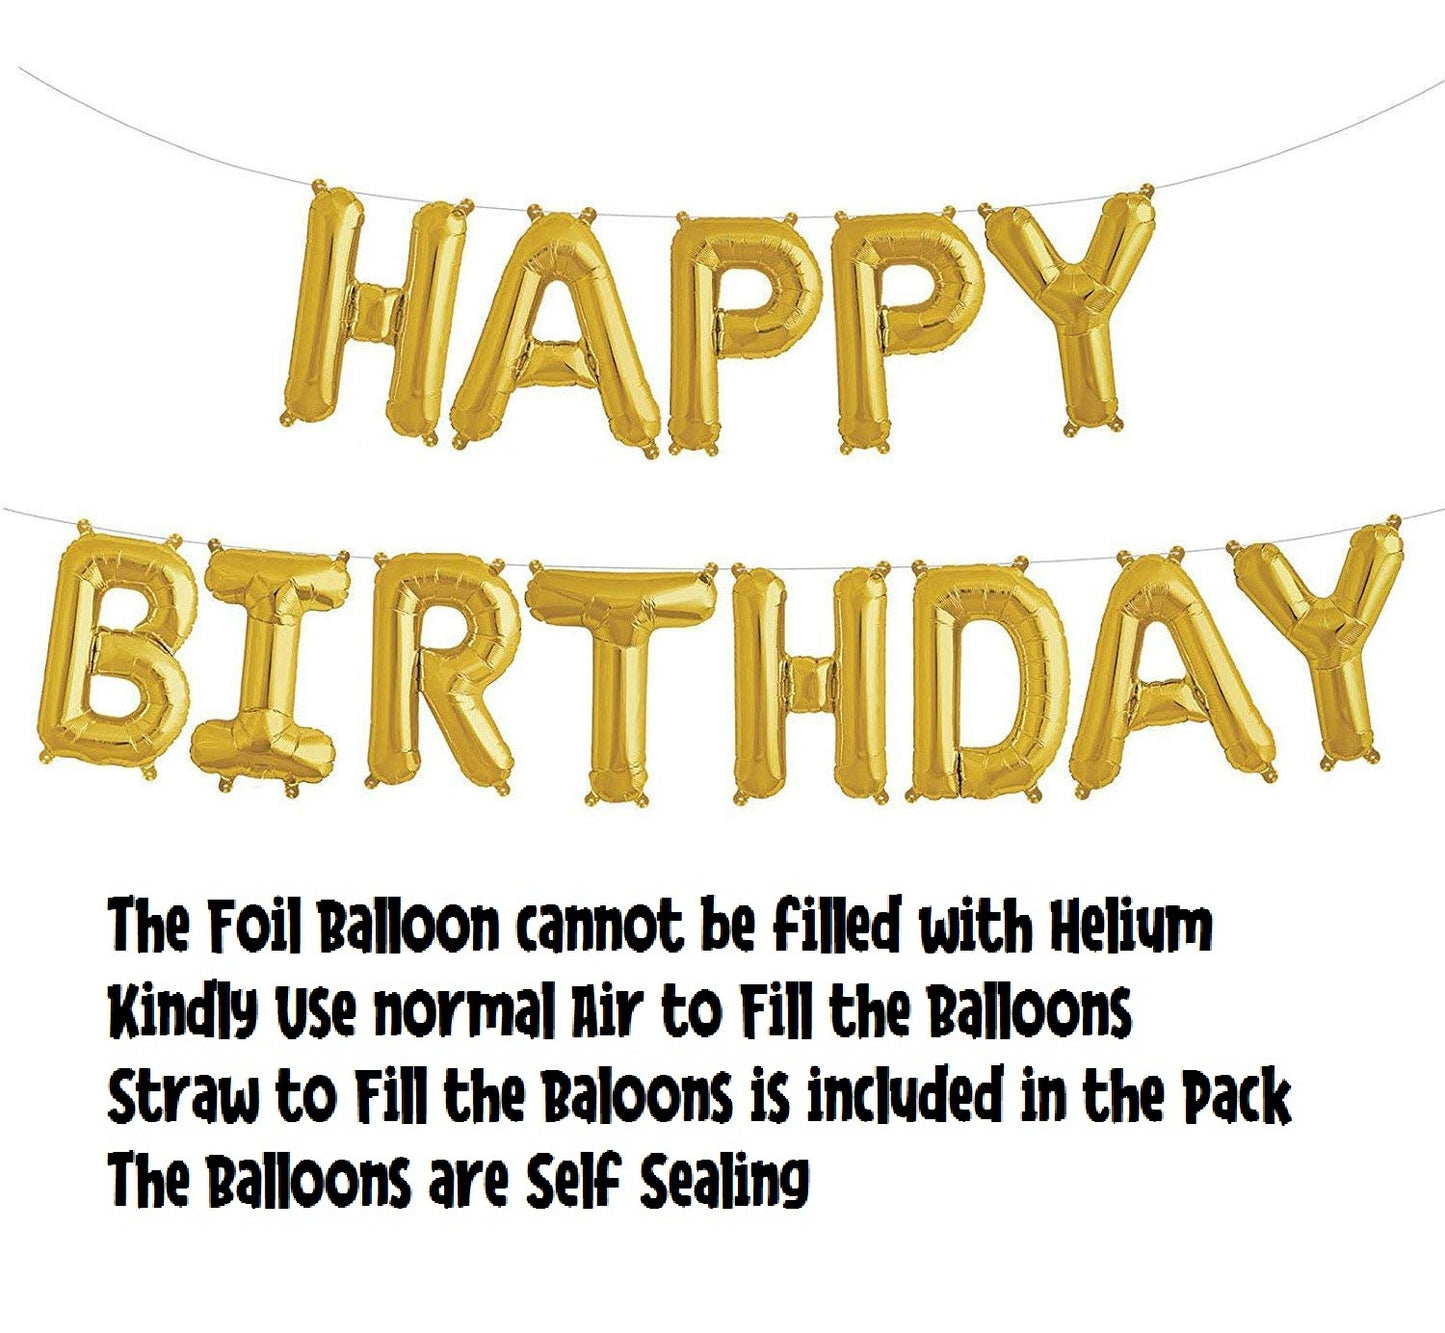 Happy 29th Birthday Foil Balloon Combo Party Decoration for Anniversary Celebration 16 Inches